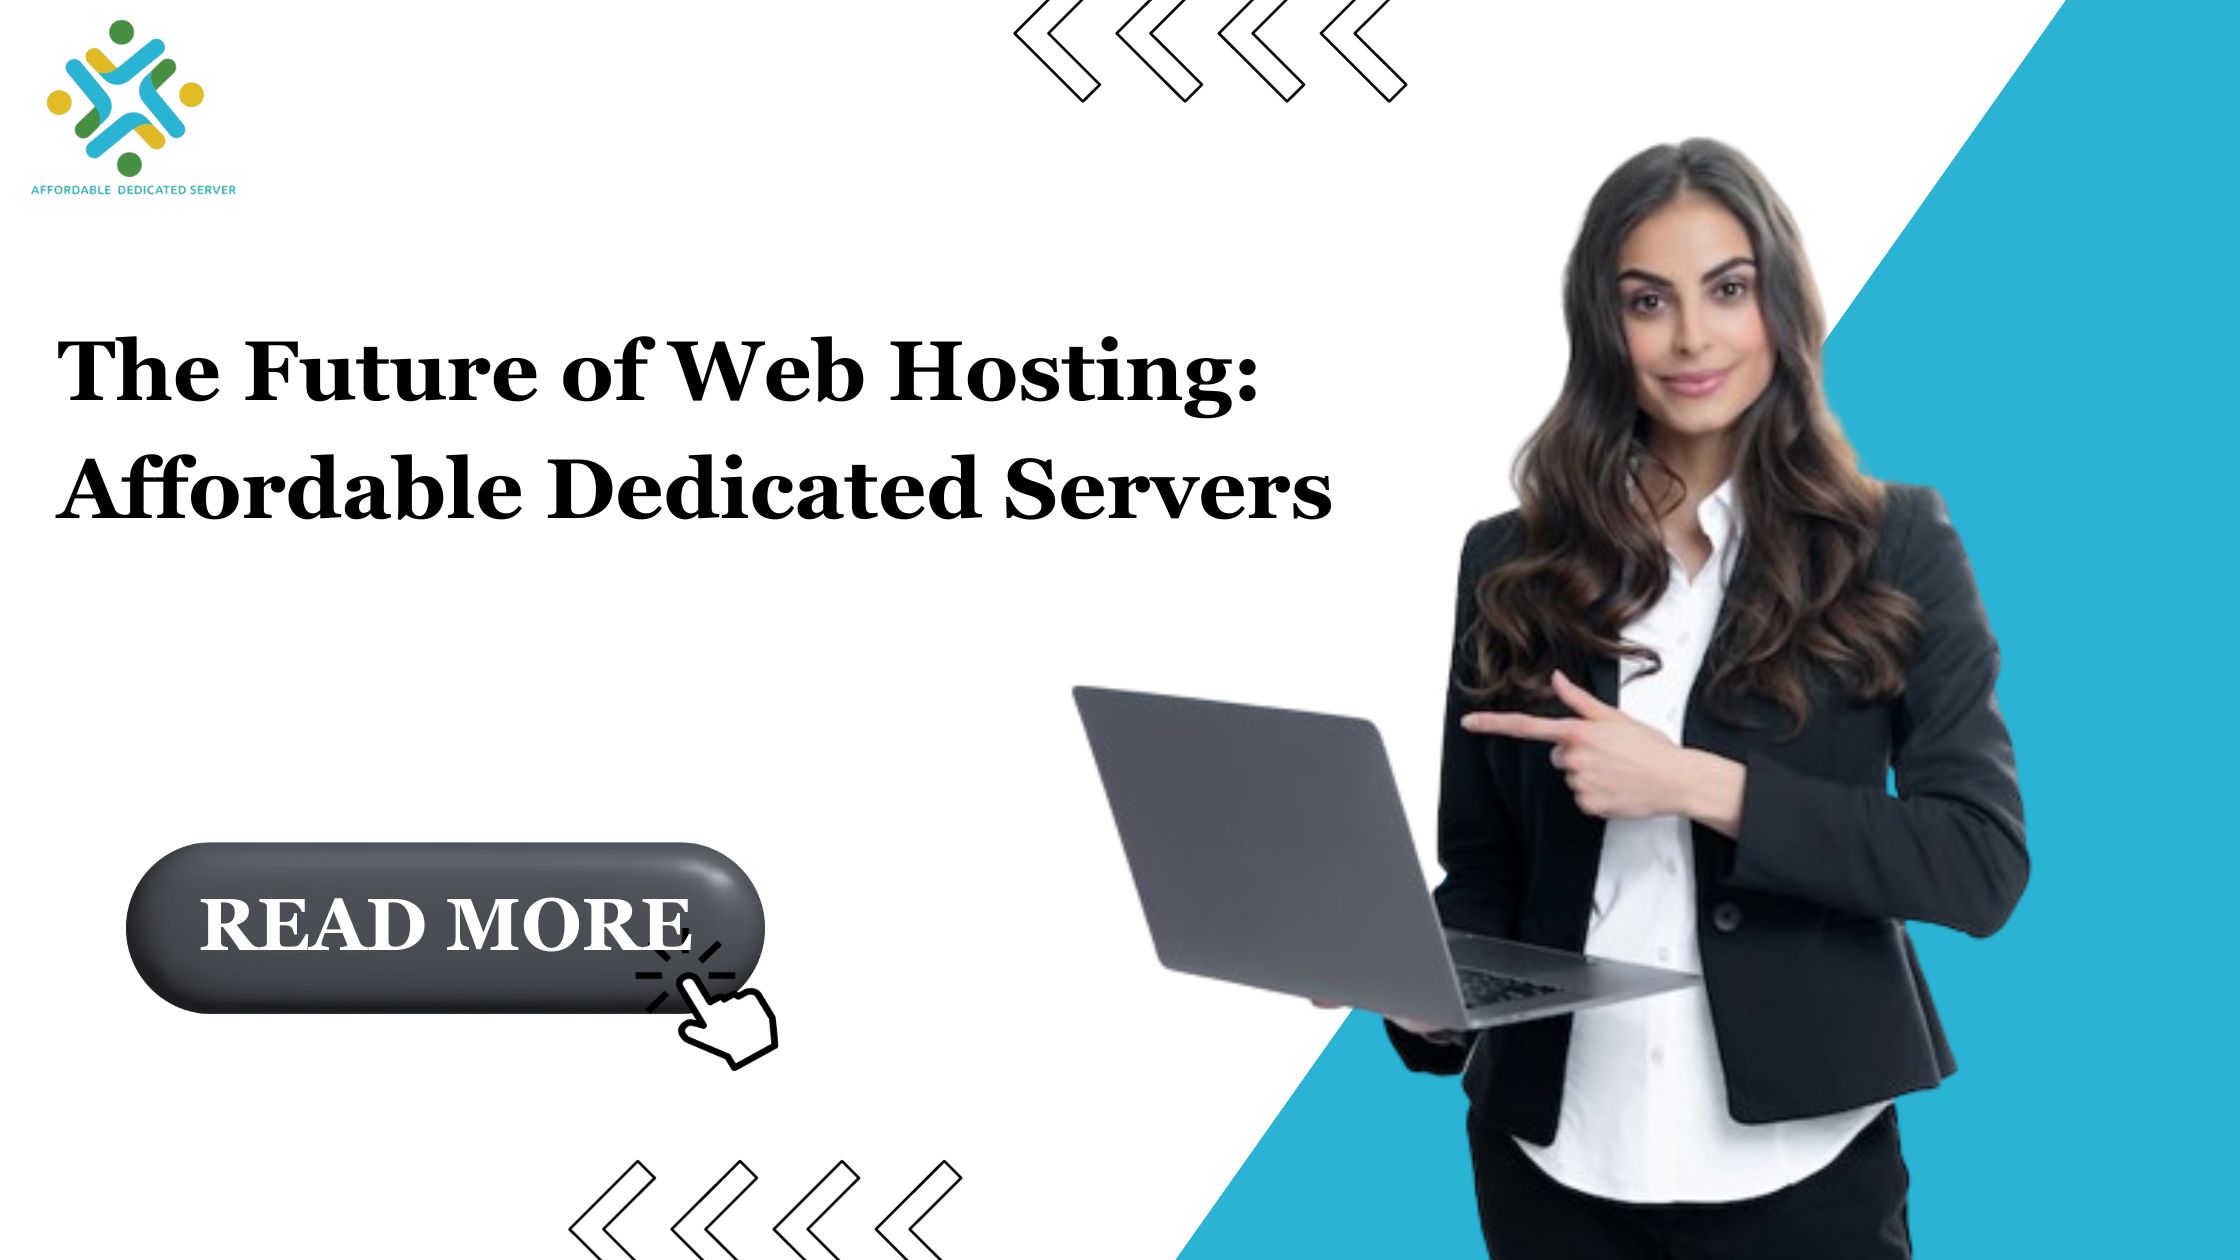 The Future of Web Hosting Affordable Dedicated Servers